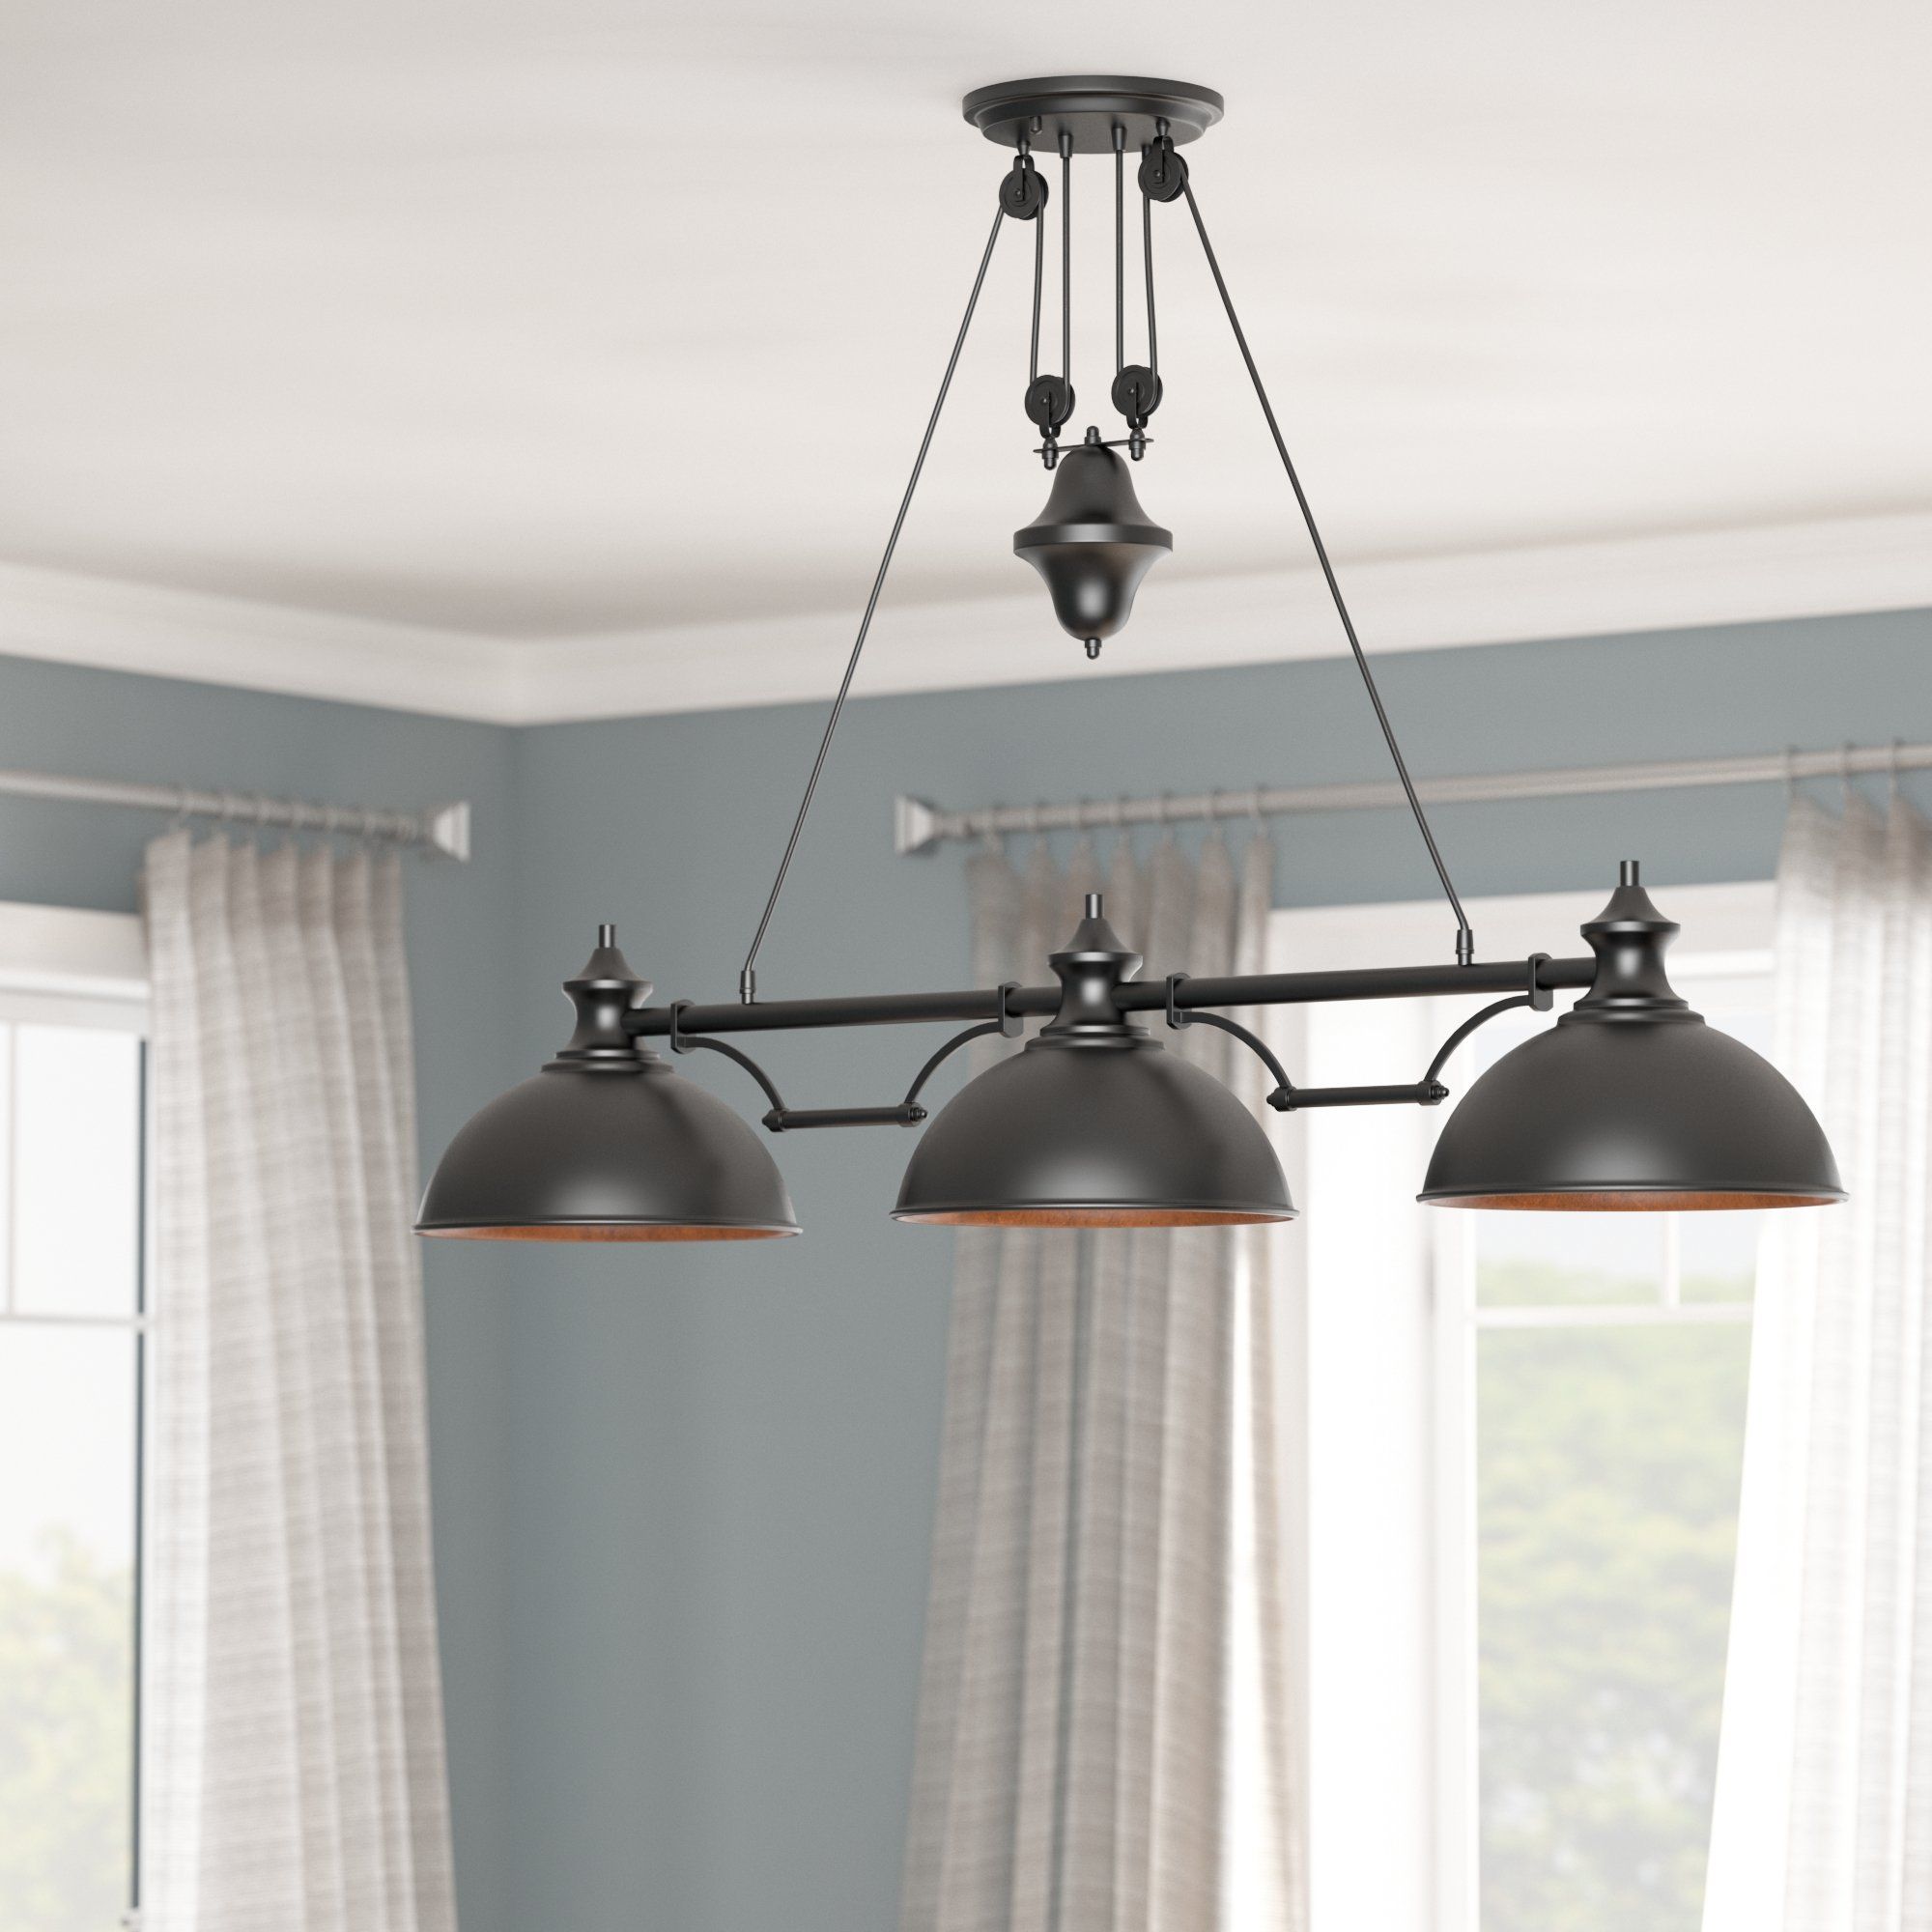 Rodriques 3 Light Kitchen Island Pendant With Regard To Ariel 3 Light Kitchen Island Dome Pendants (View 6 of 30)